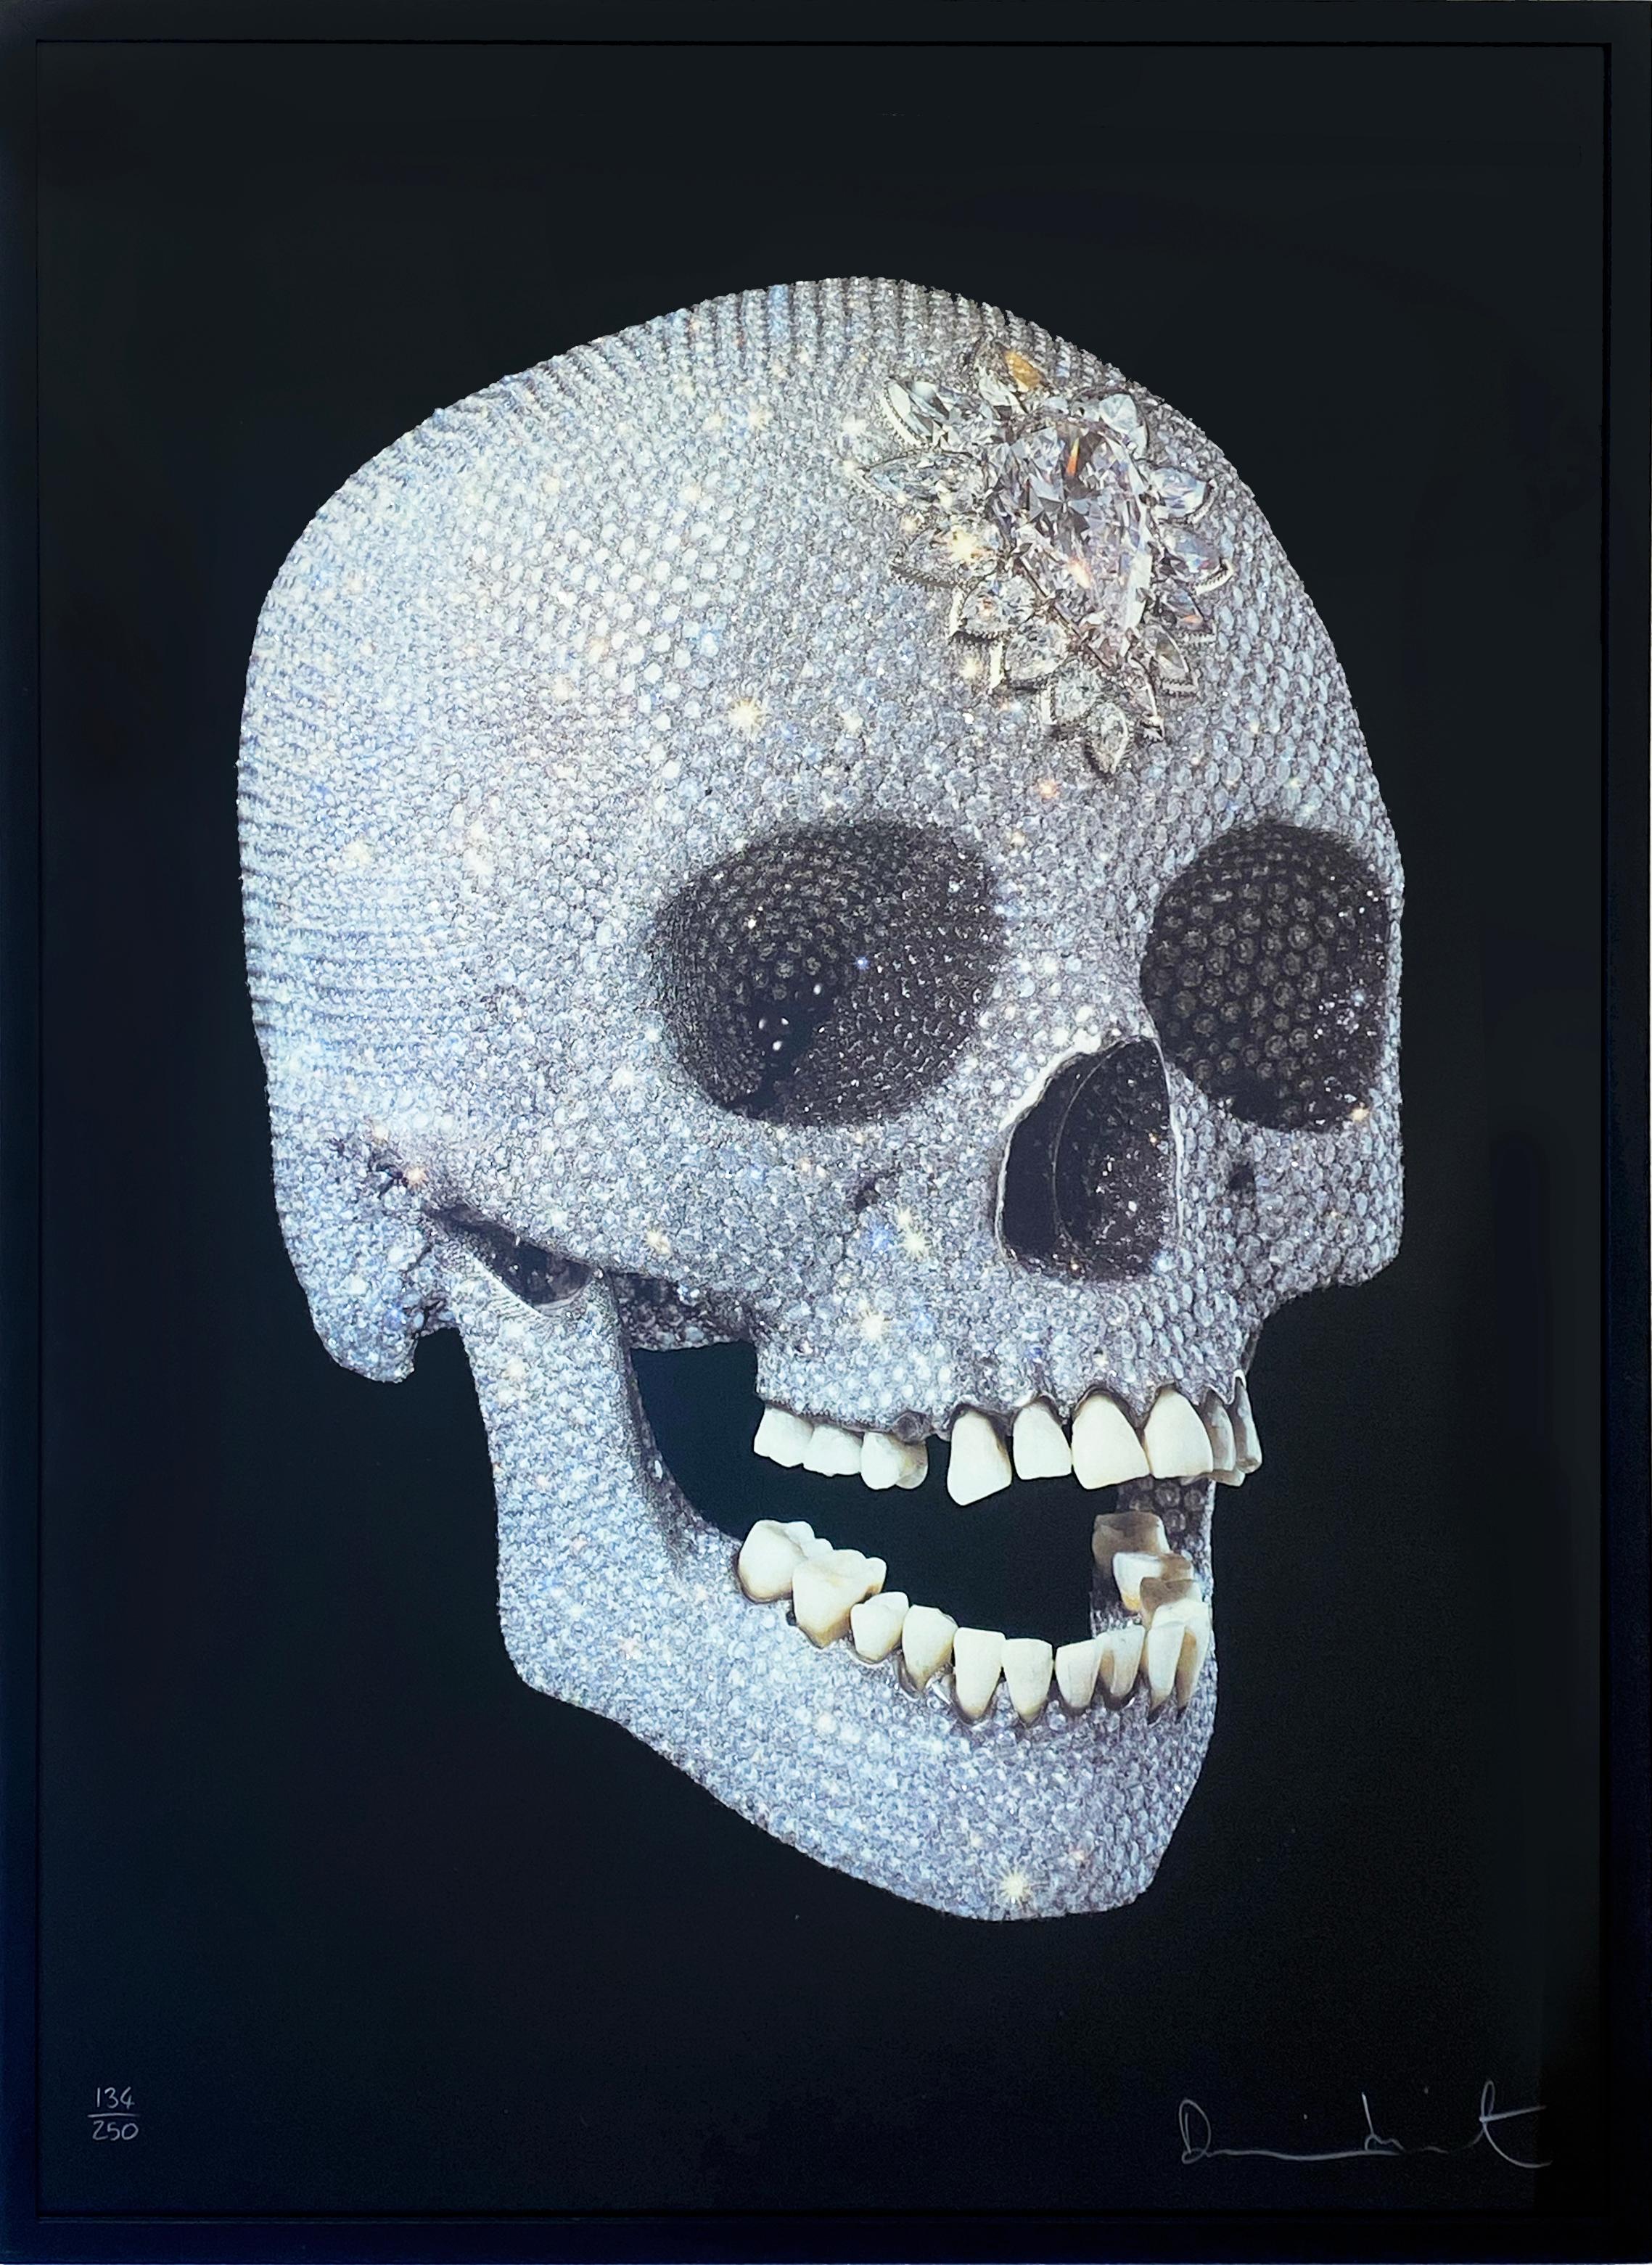 Diamond Skull (For the Love of God) - Print by Damien Hirst